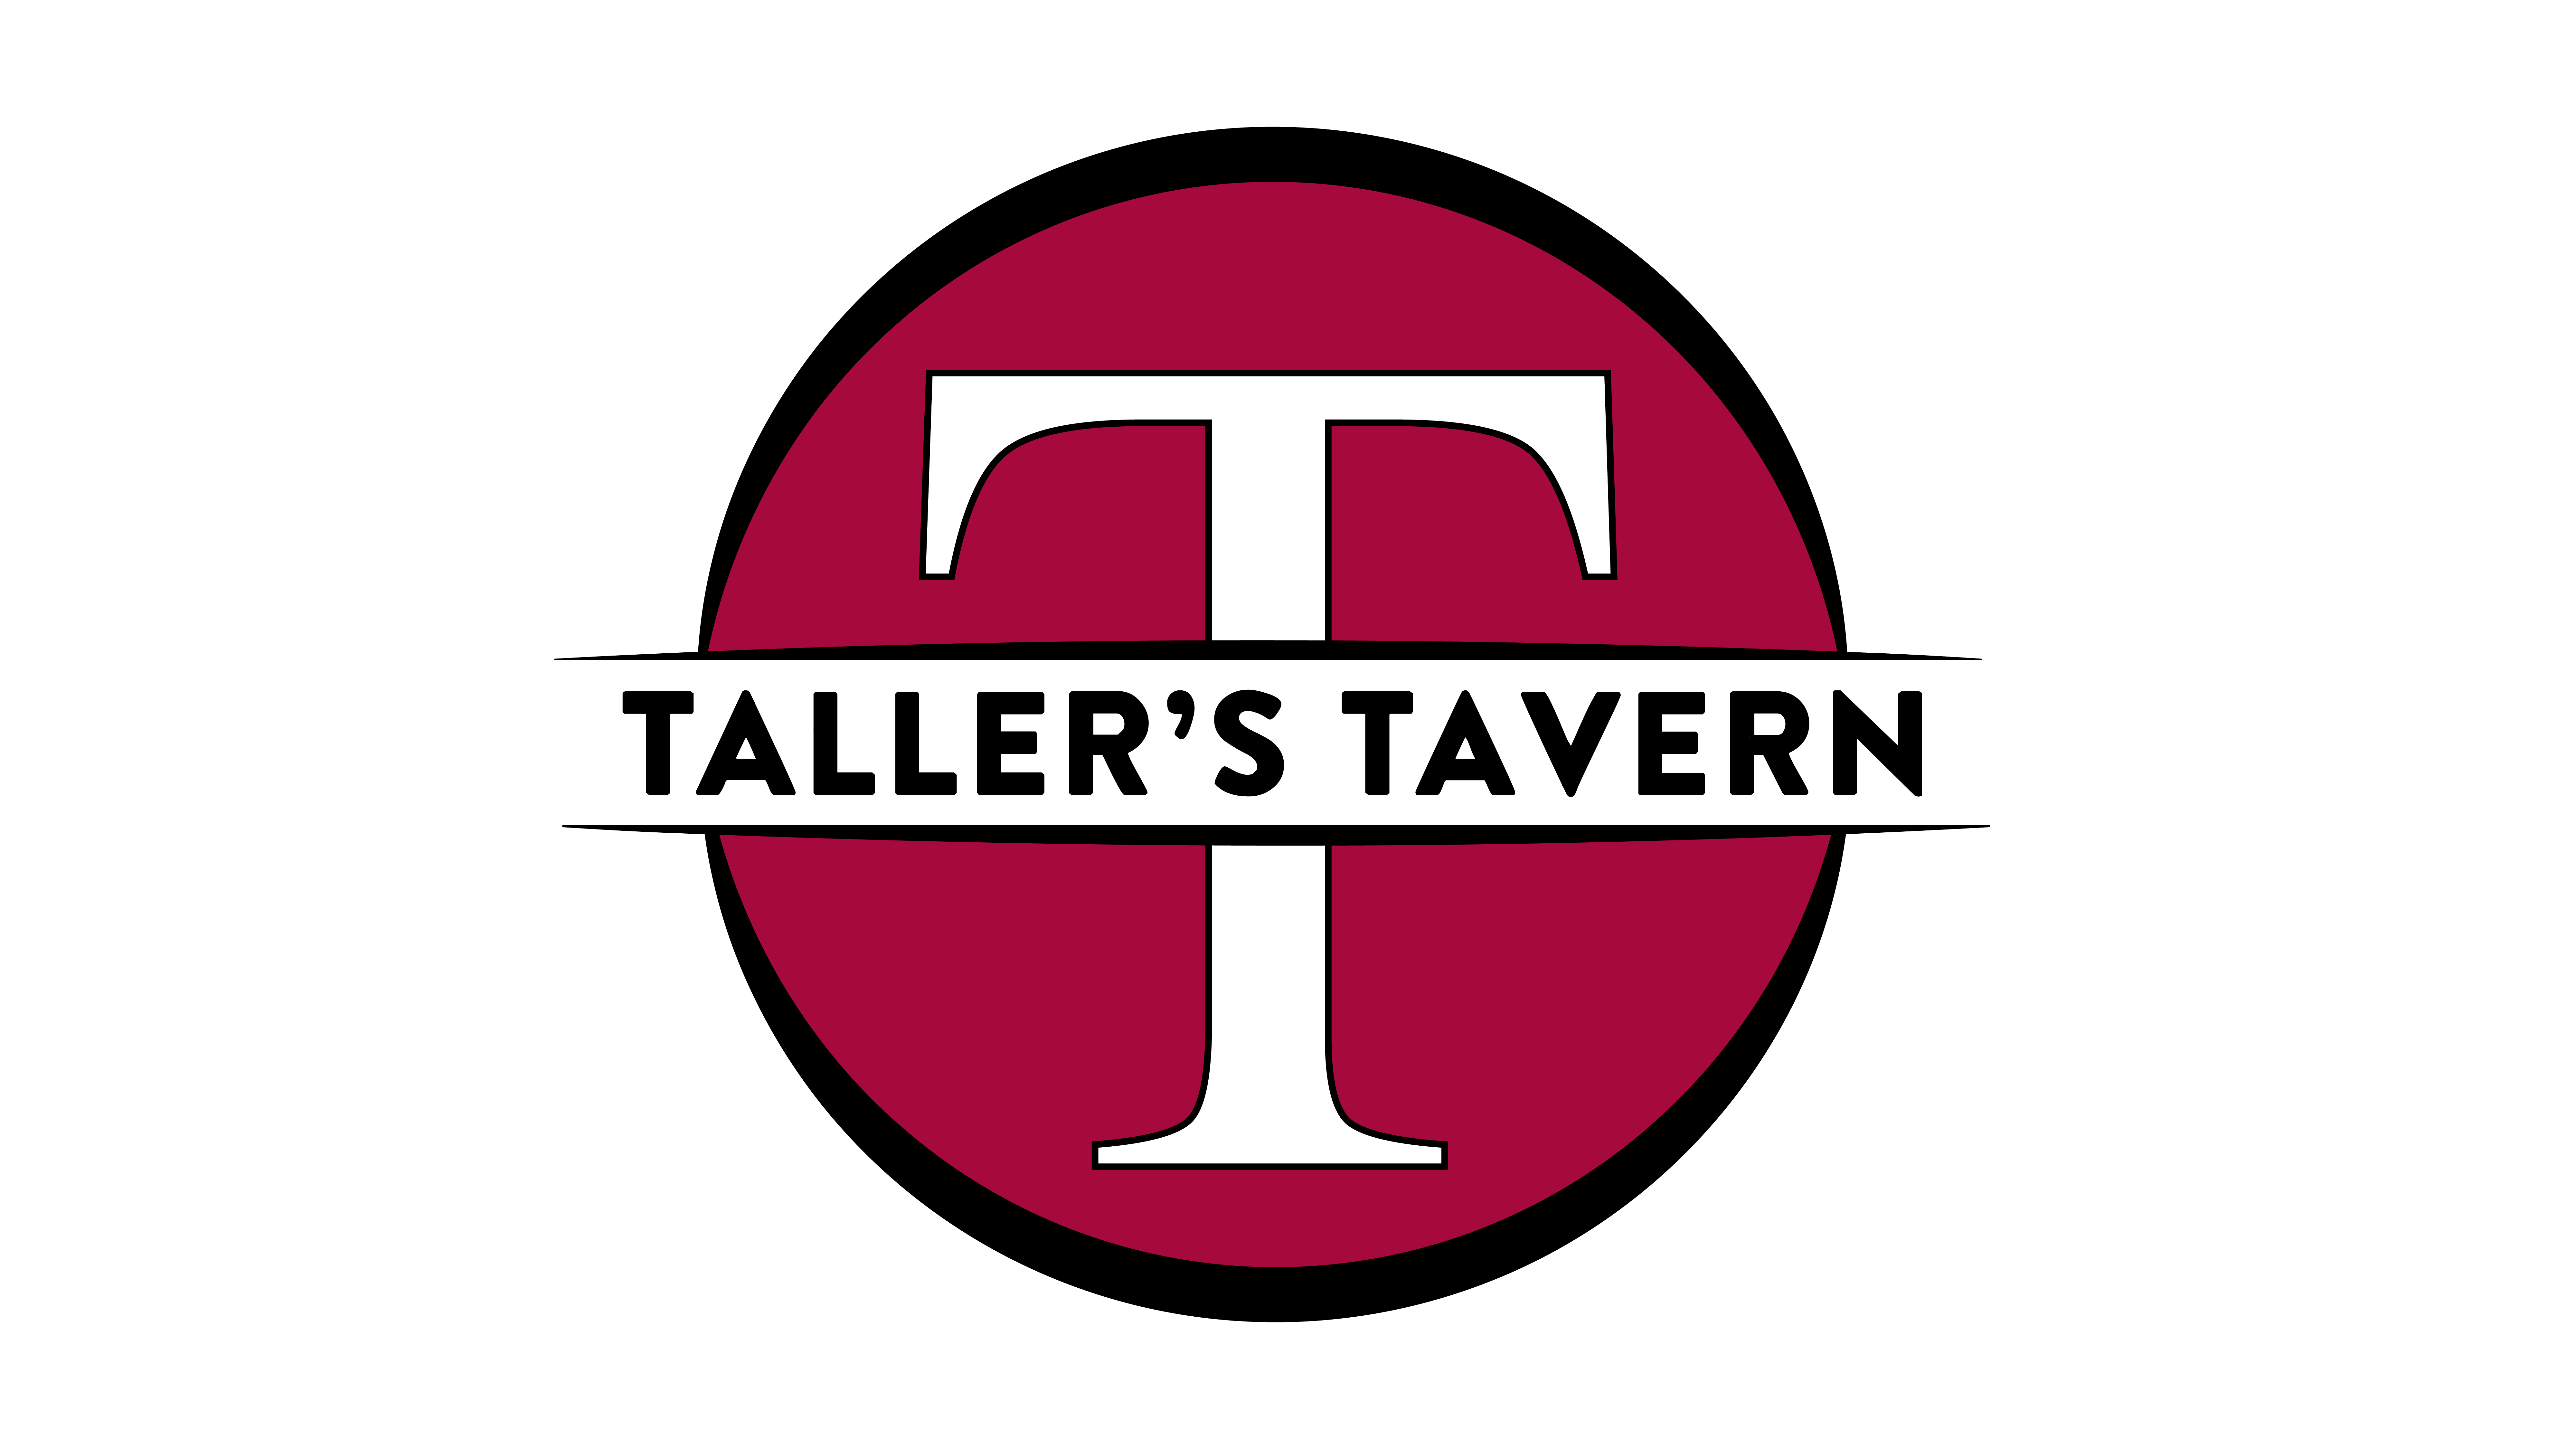 Tallers Tavern 7035 W. Grand Pkwy S. Suite 99